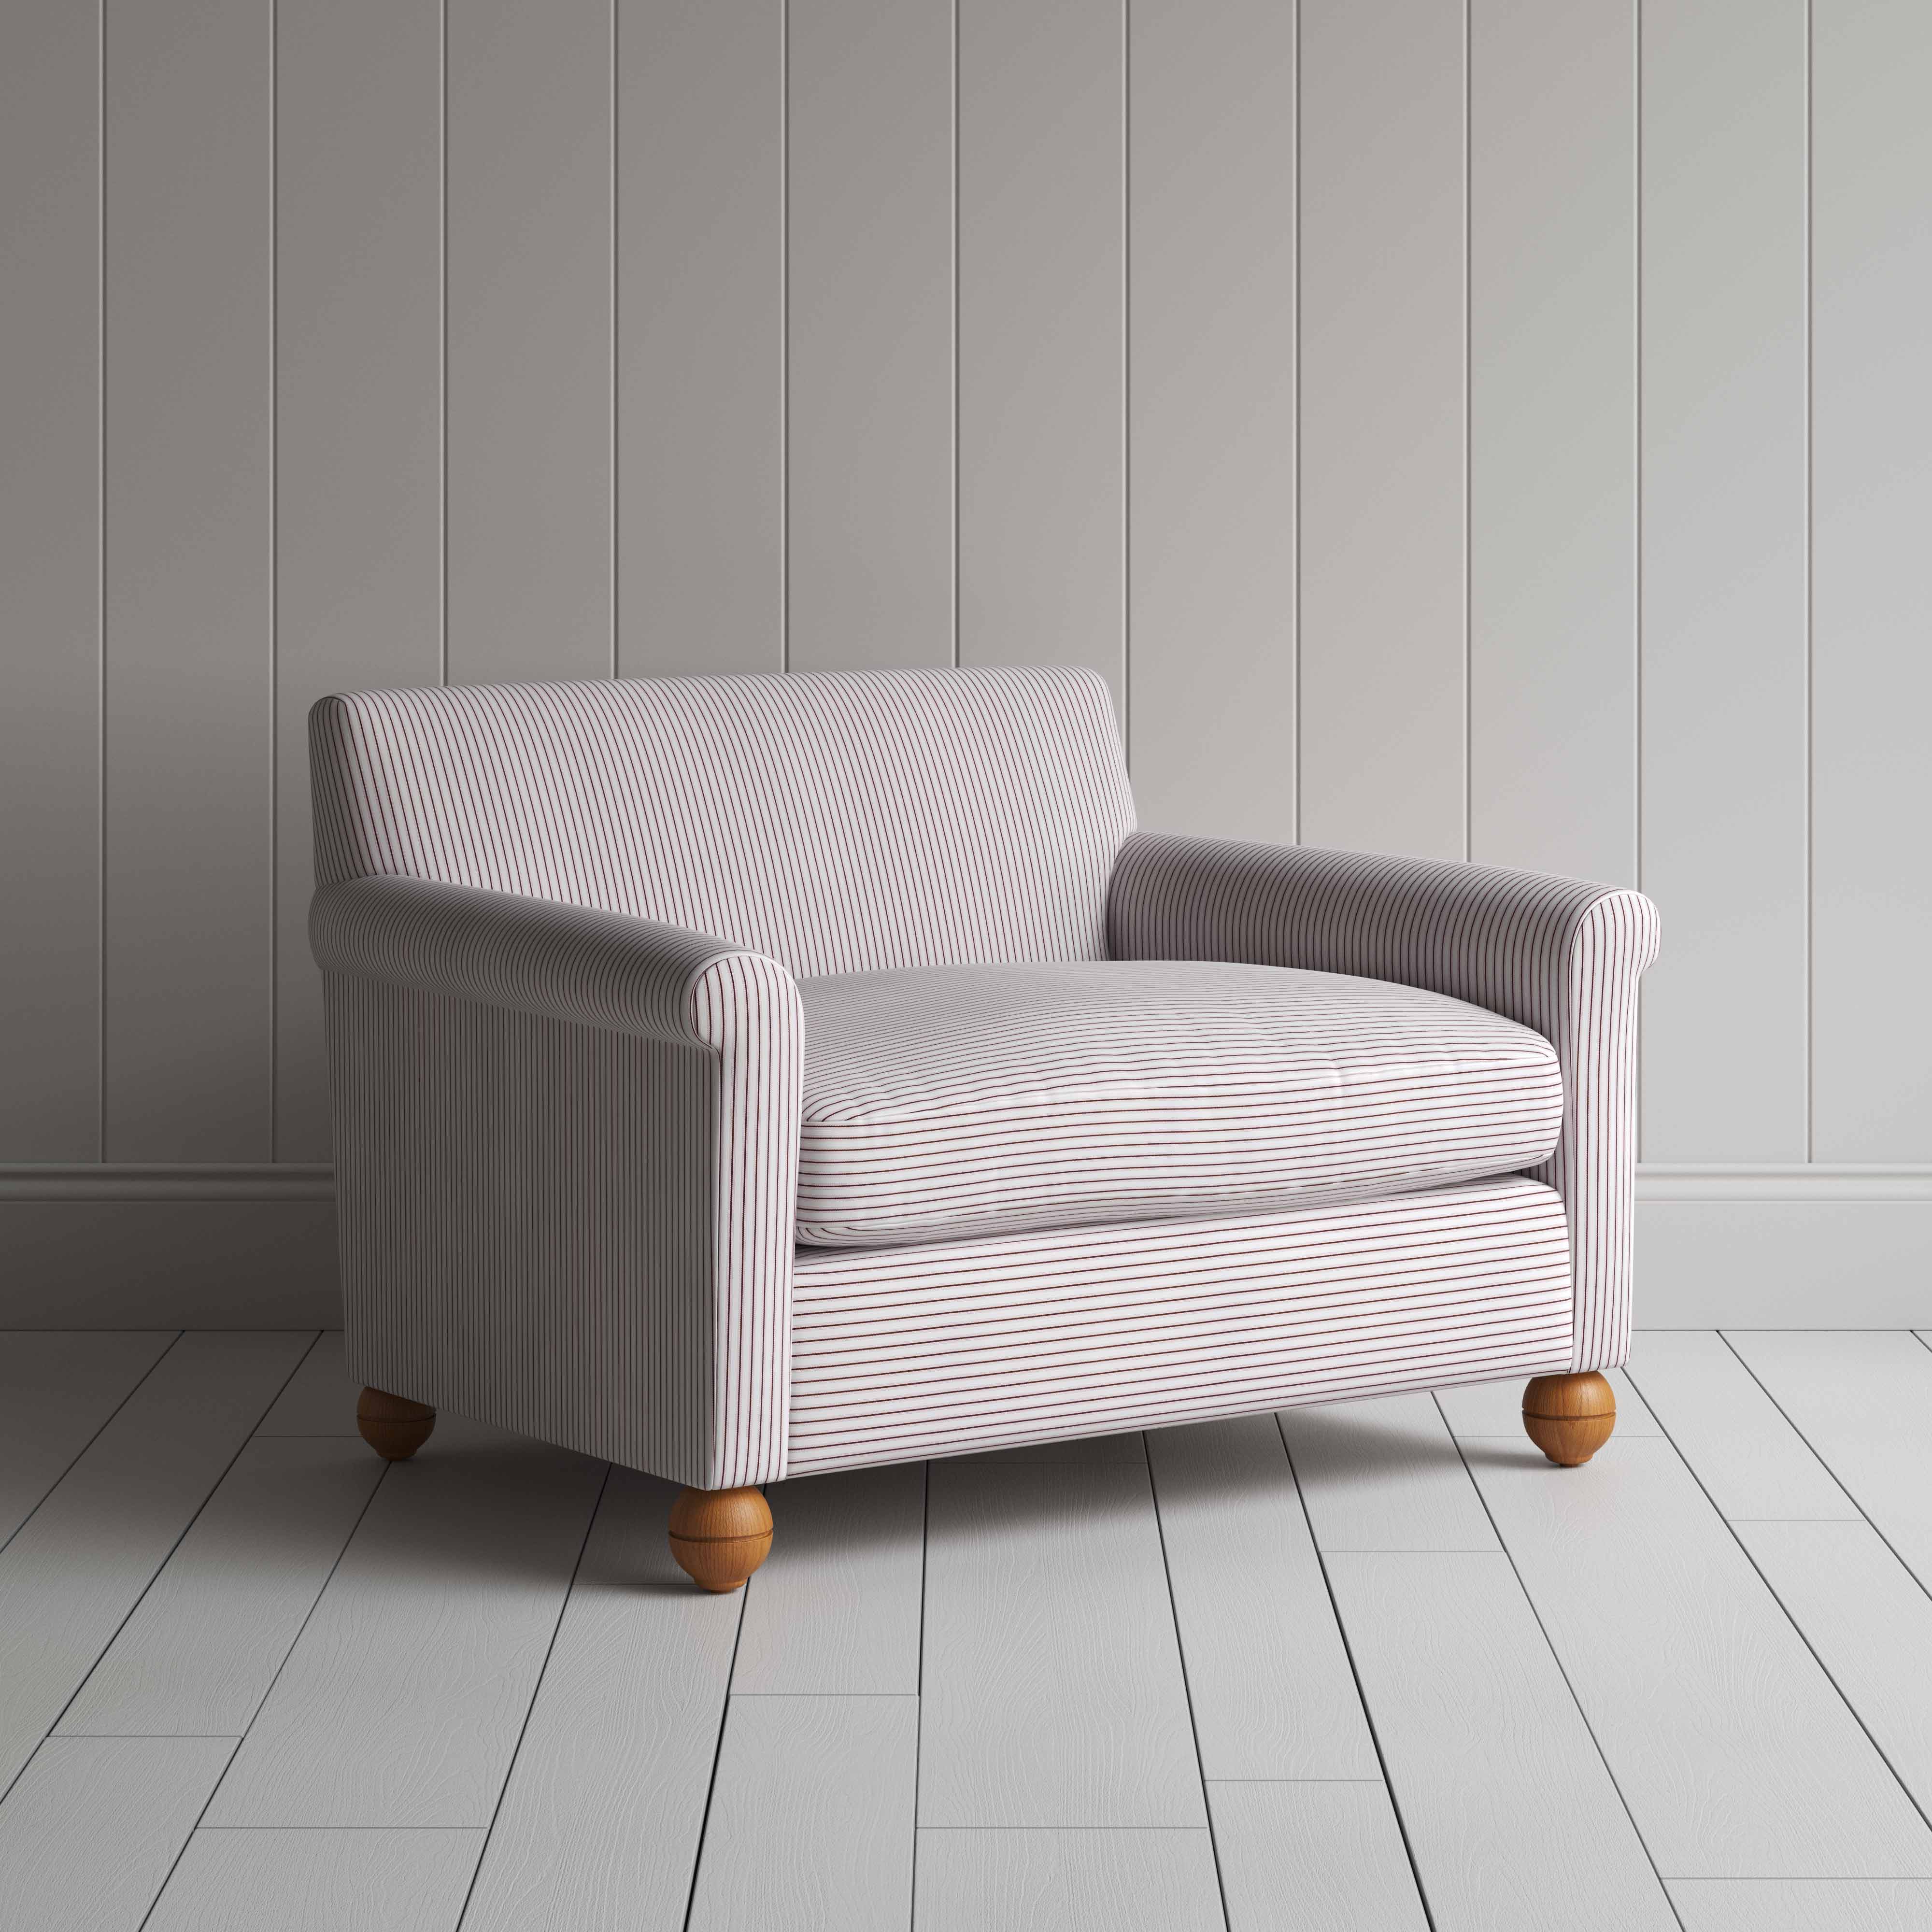  Idler Love Seat in Ticking Cotton, Berry 